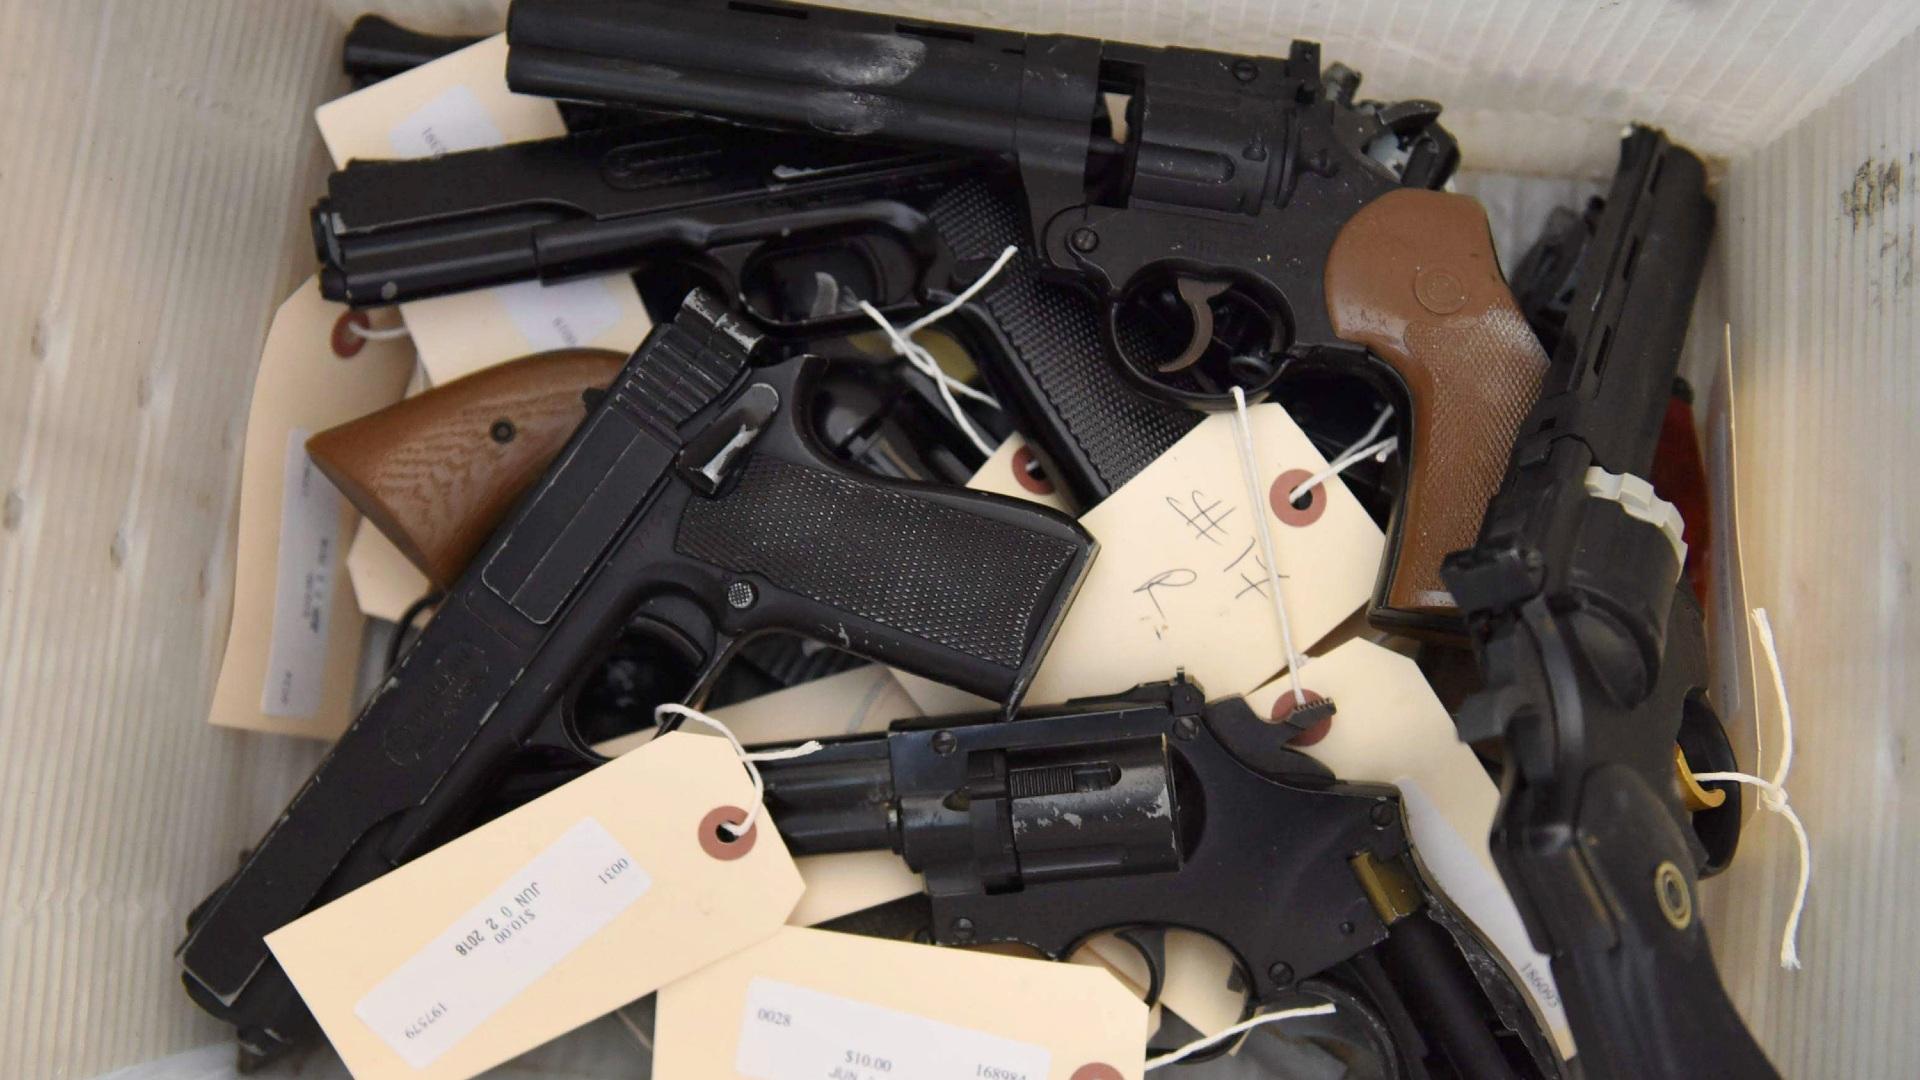 Chicago Mayor Lori Lightfoot said the gun buyback program would get “guns out of the hands of dangerous people.” (Chicago Police Department / AP)